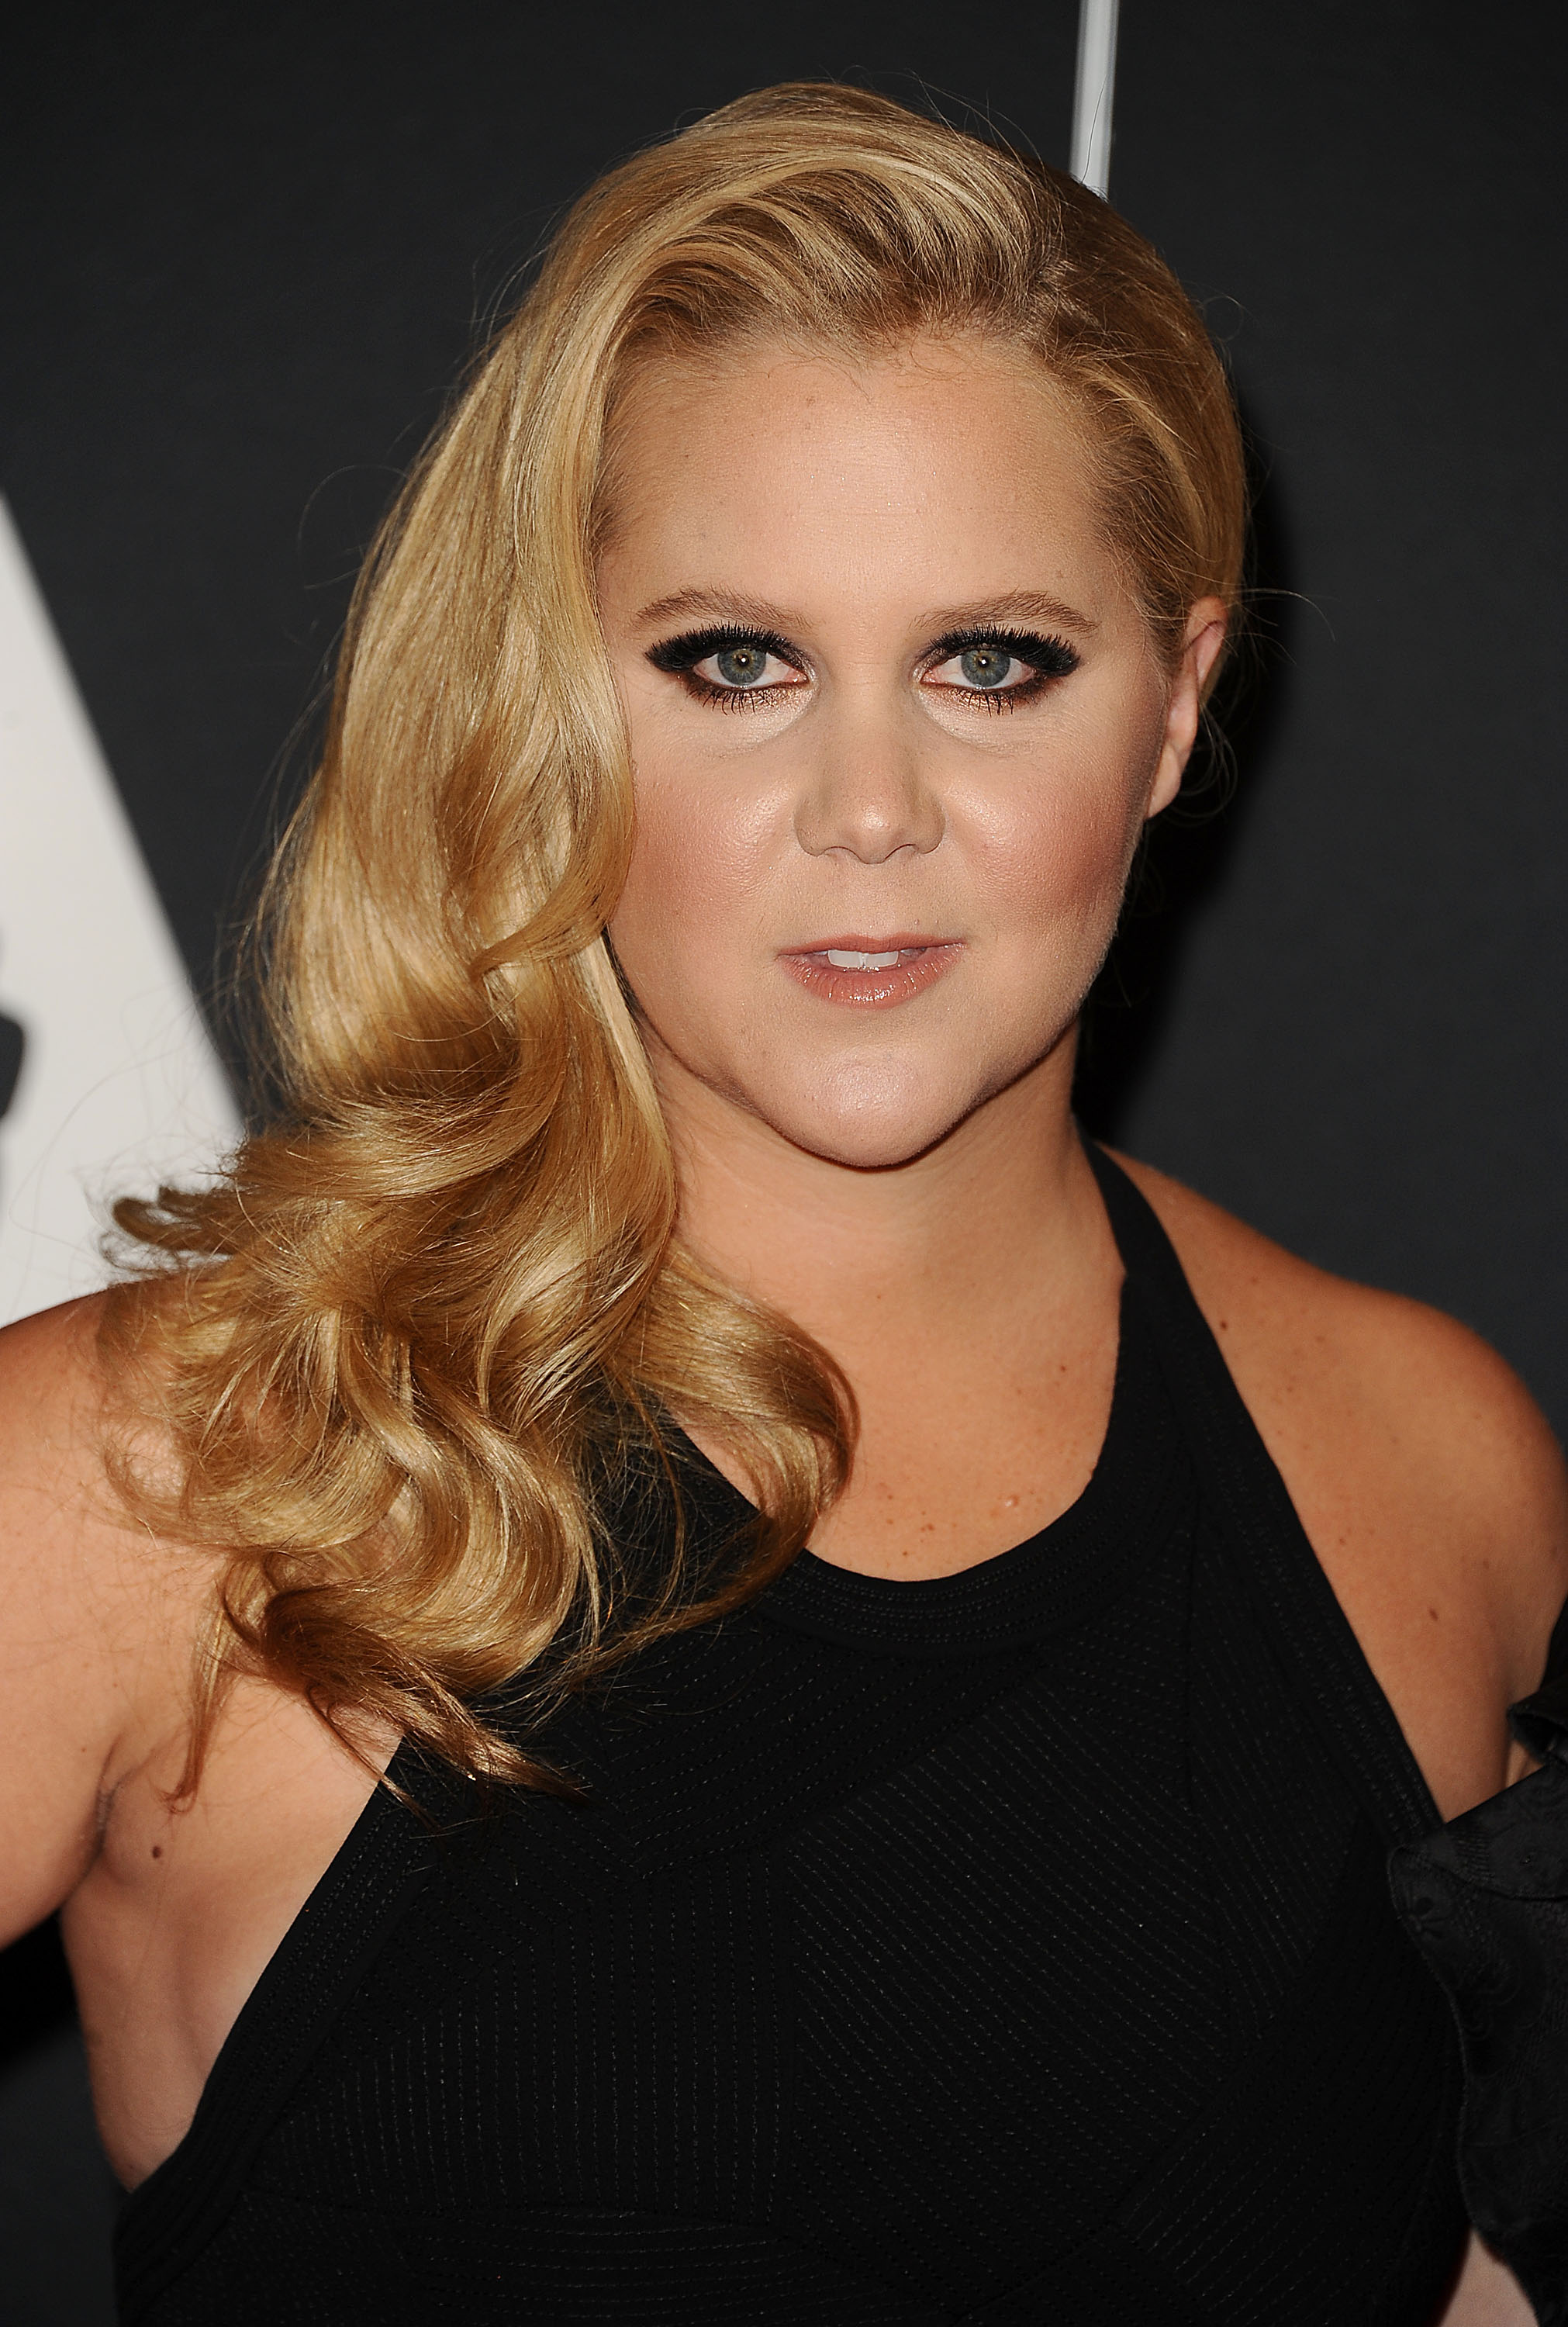 Amy Schumer at the 7th annual Governors Awards in Hollywood on Nov. 14, 2015.